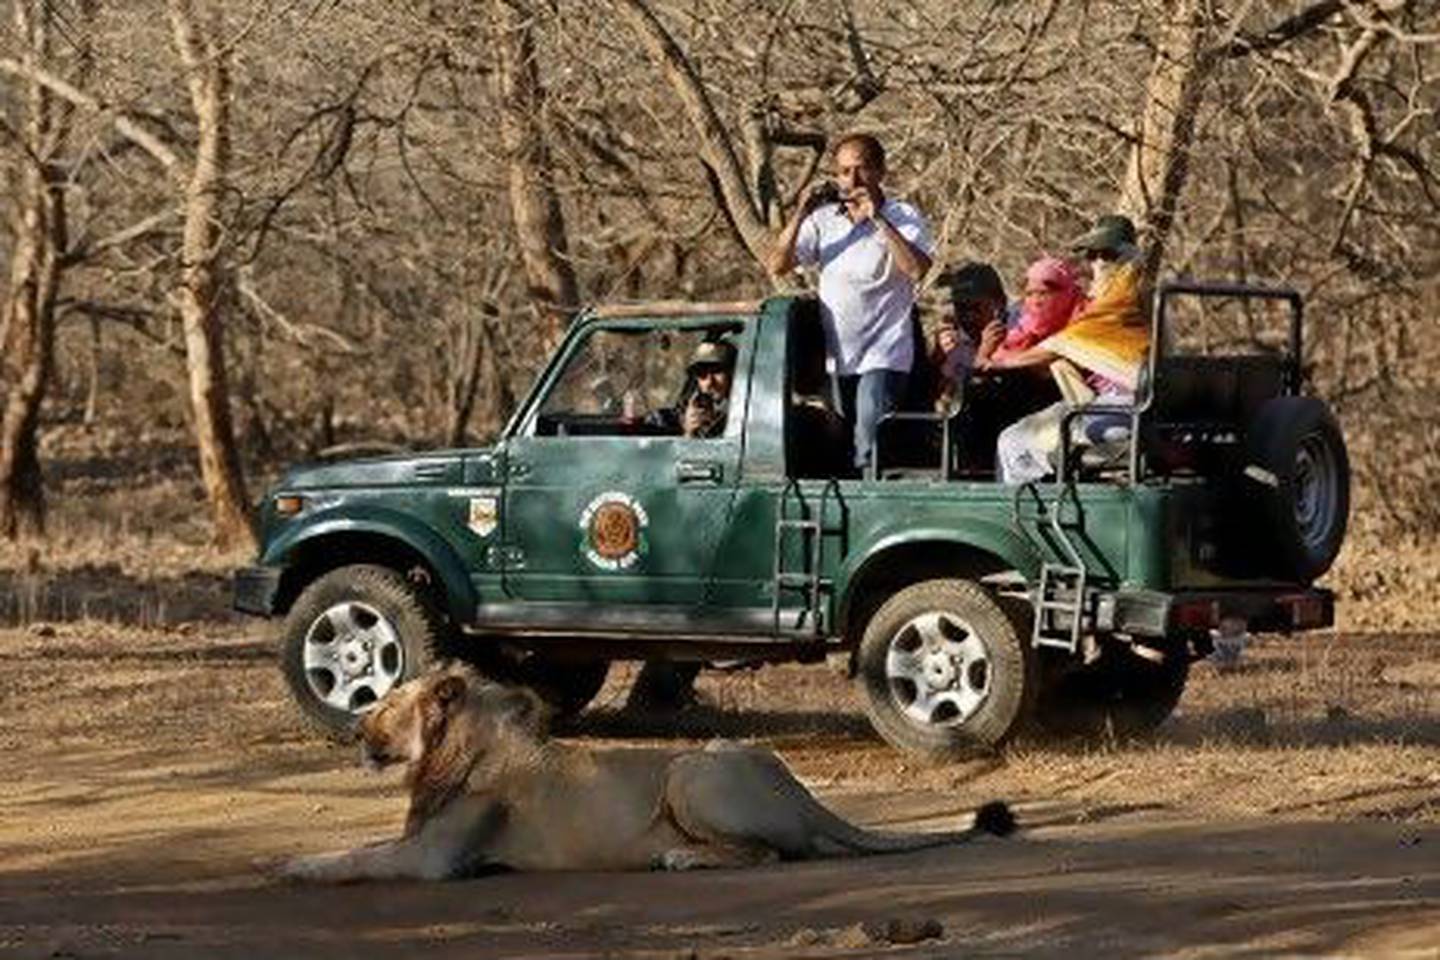 Tourists take photos of an Asiatic lion during a safari at the Gir National Park in the western Indian state of Gujarat, India